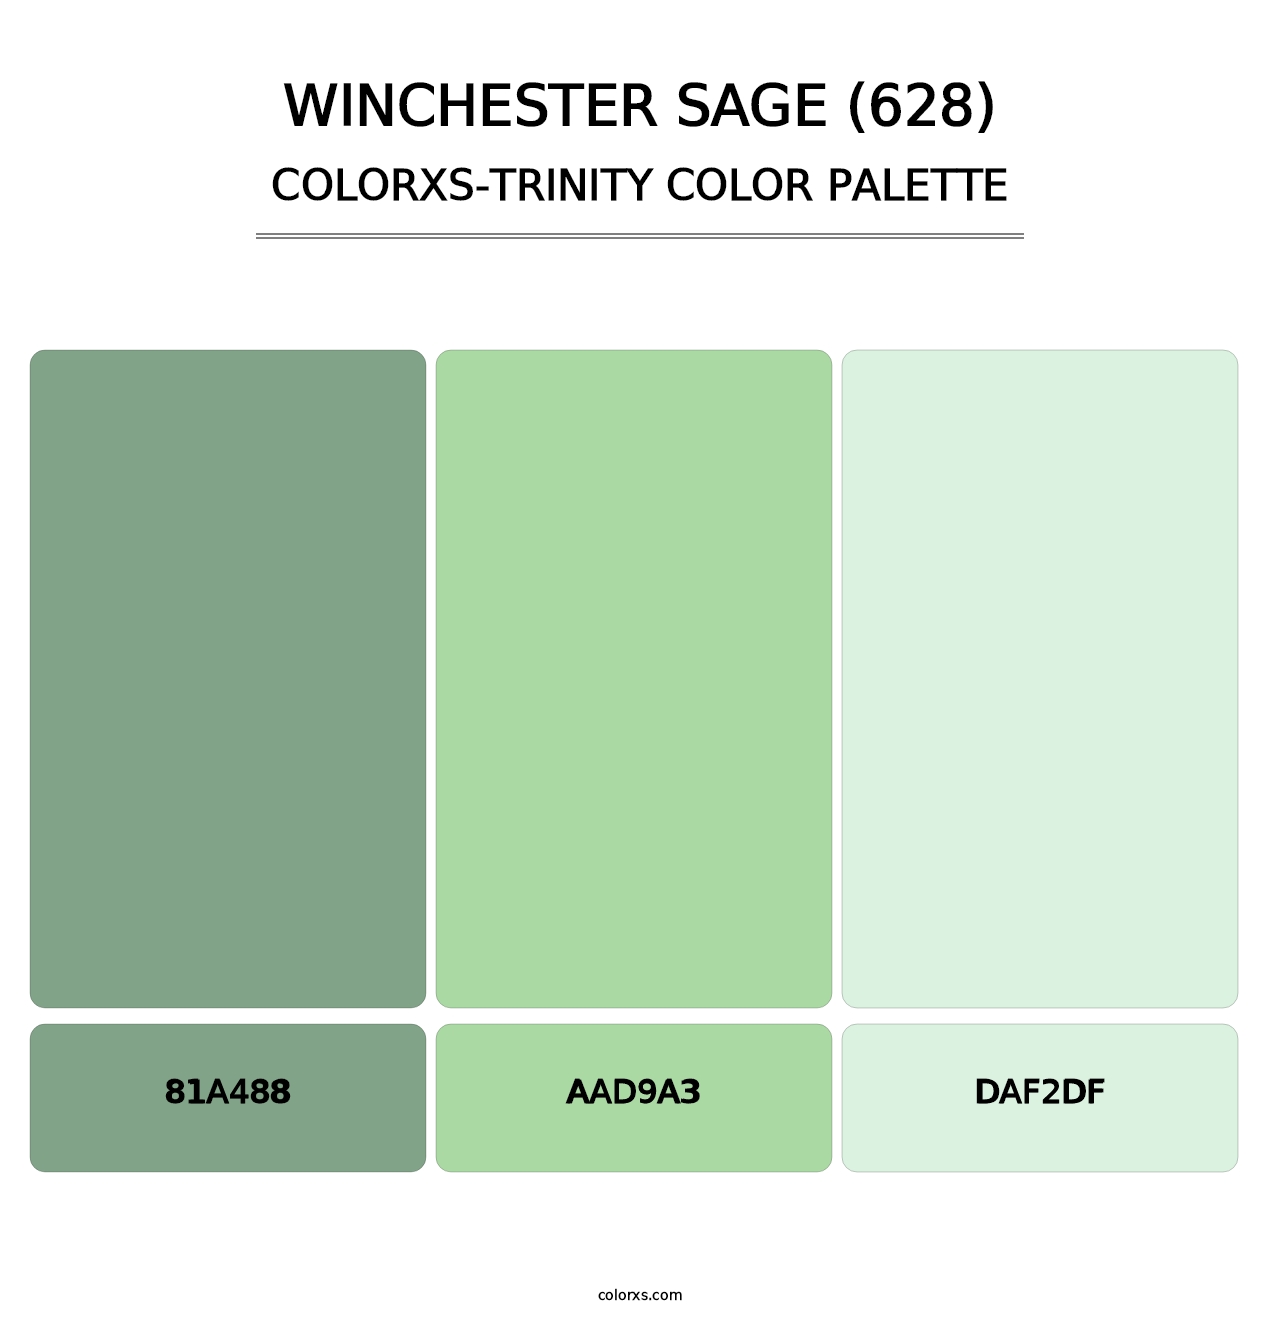 Winchester Sage (628) - Colorxs Trinity Palette